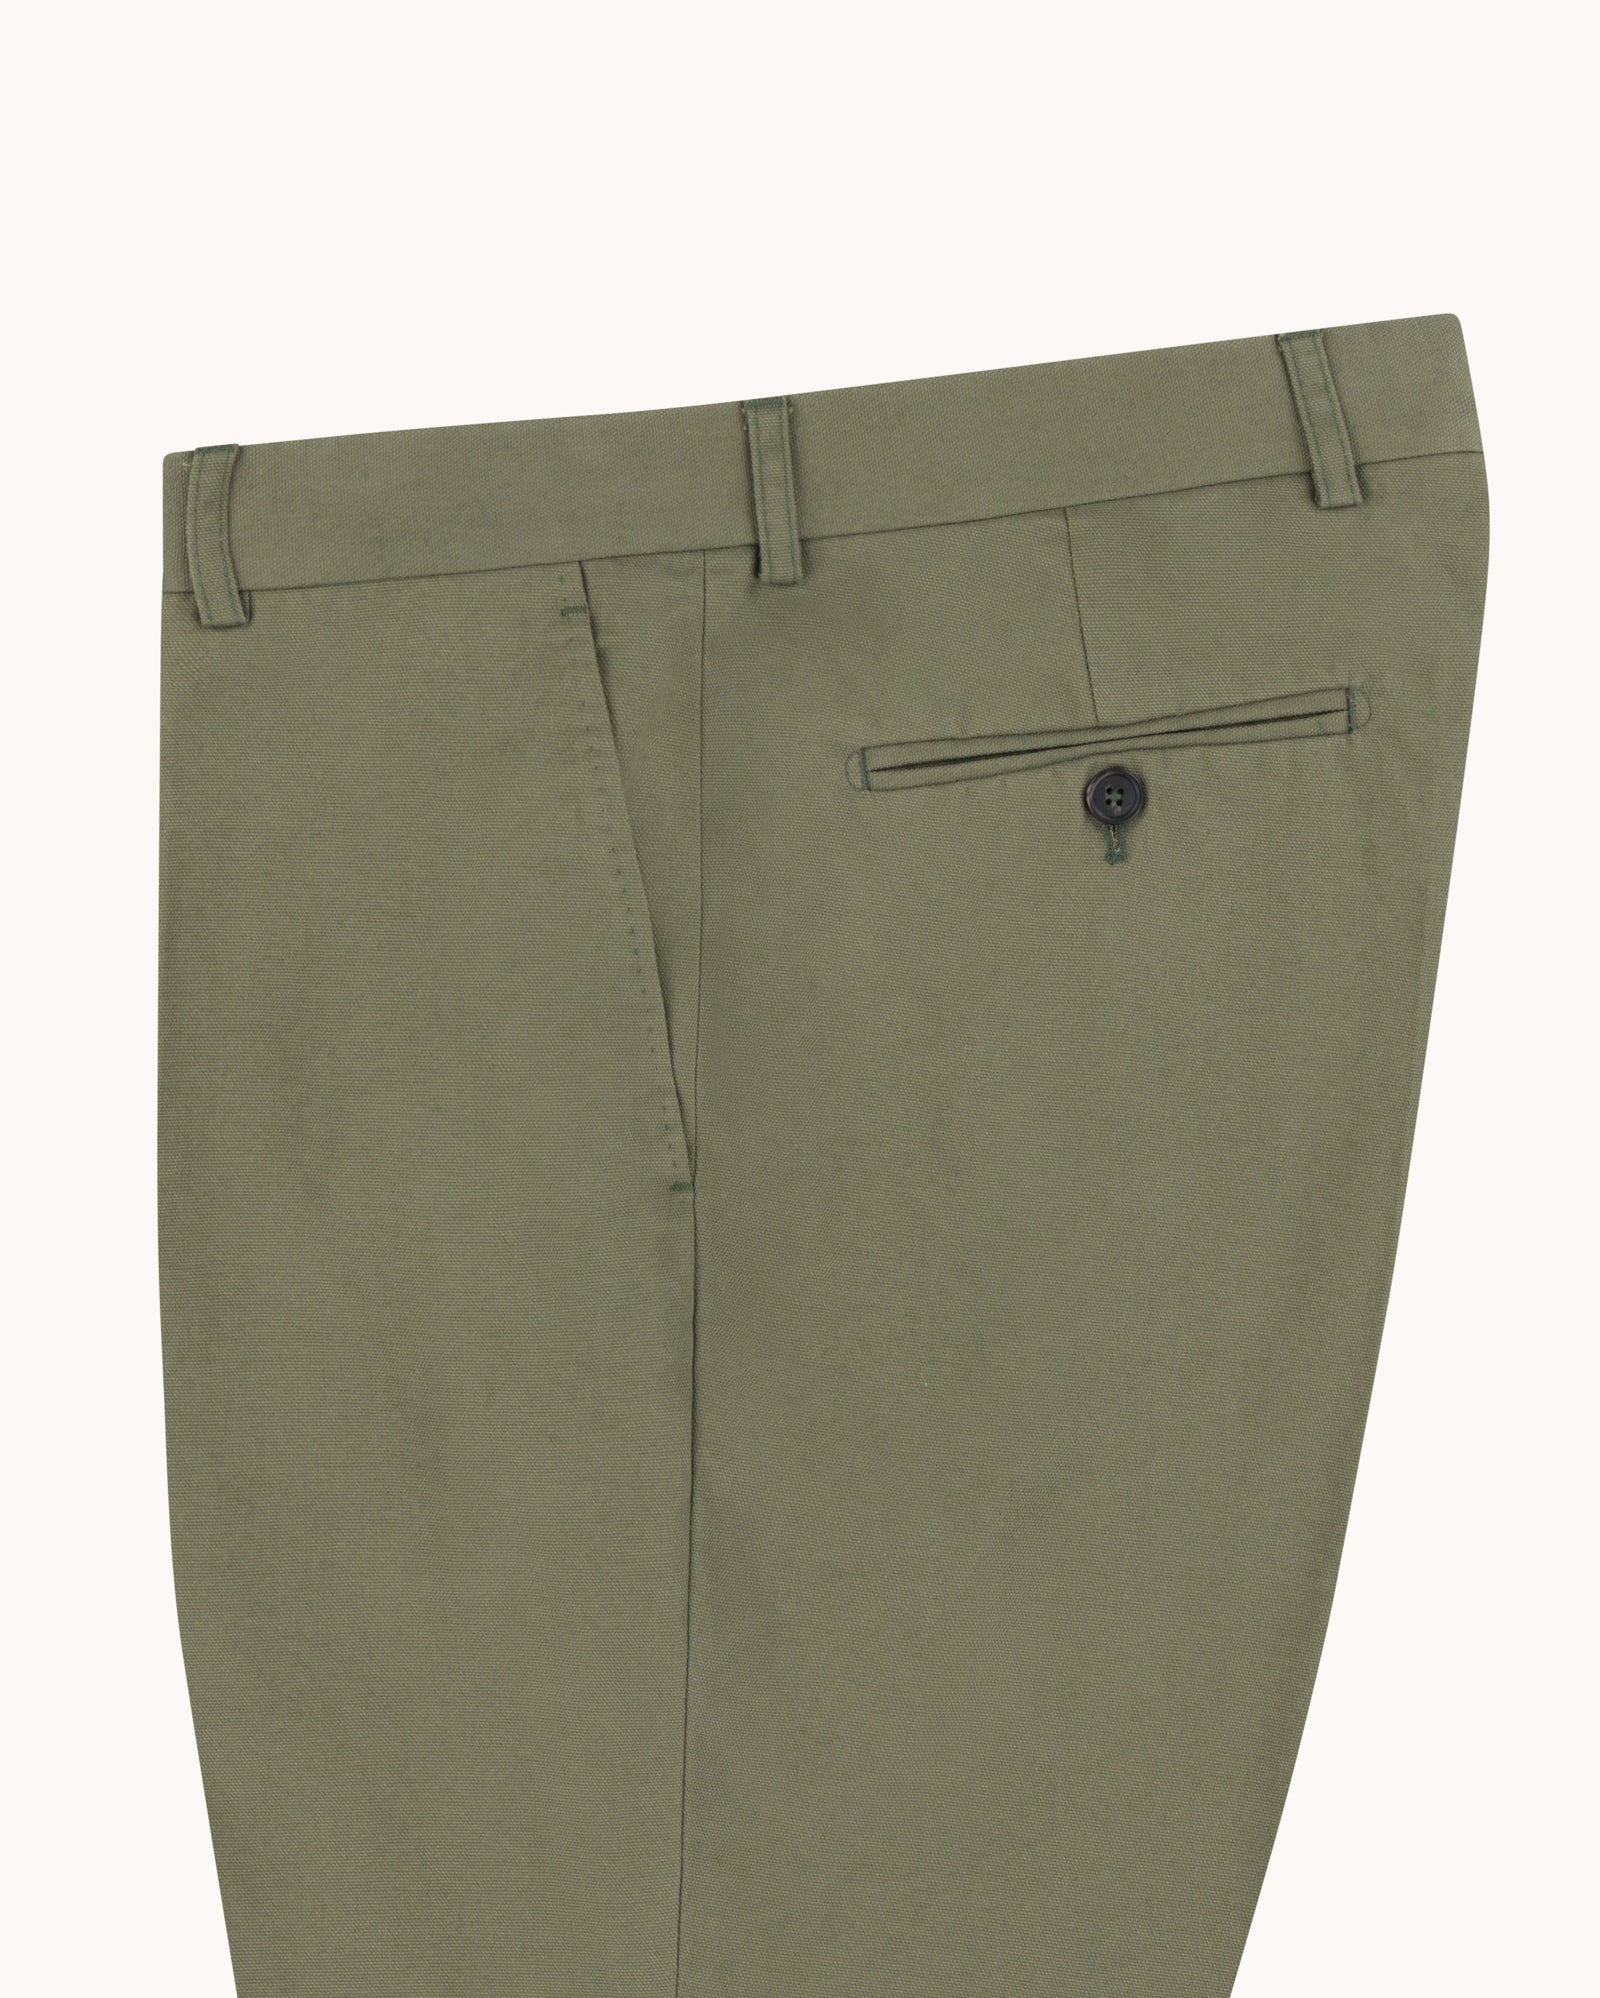 Garment Washed Flat Front Trouser - Olive Cotton Canvas